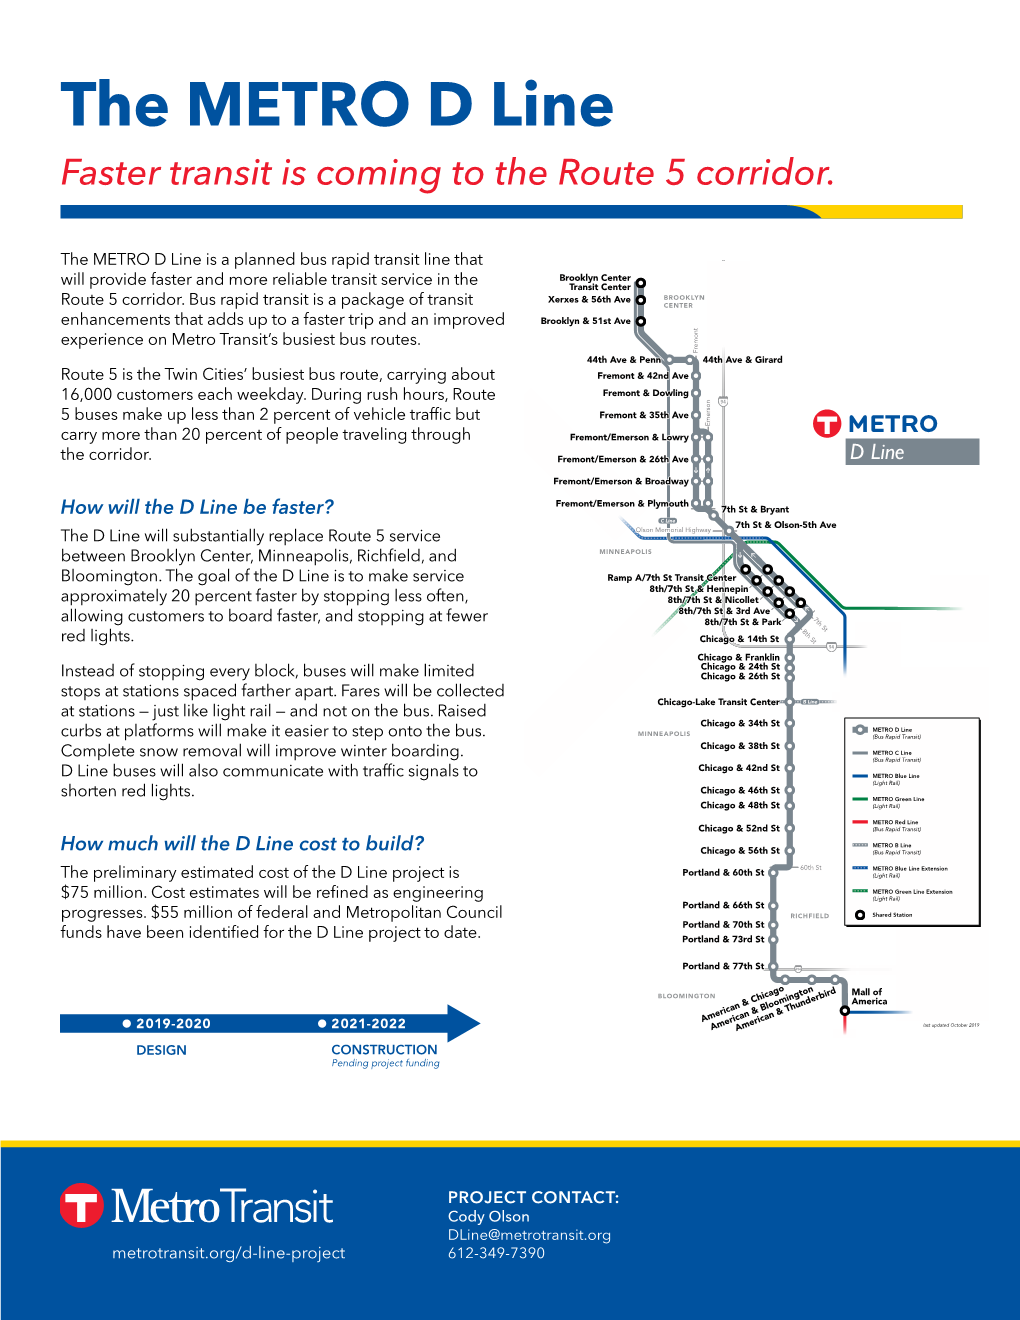 The METRO D Line Faster Transit Is Coming to the Route 5 Corridor